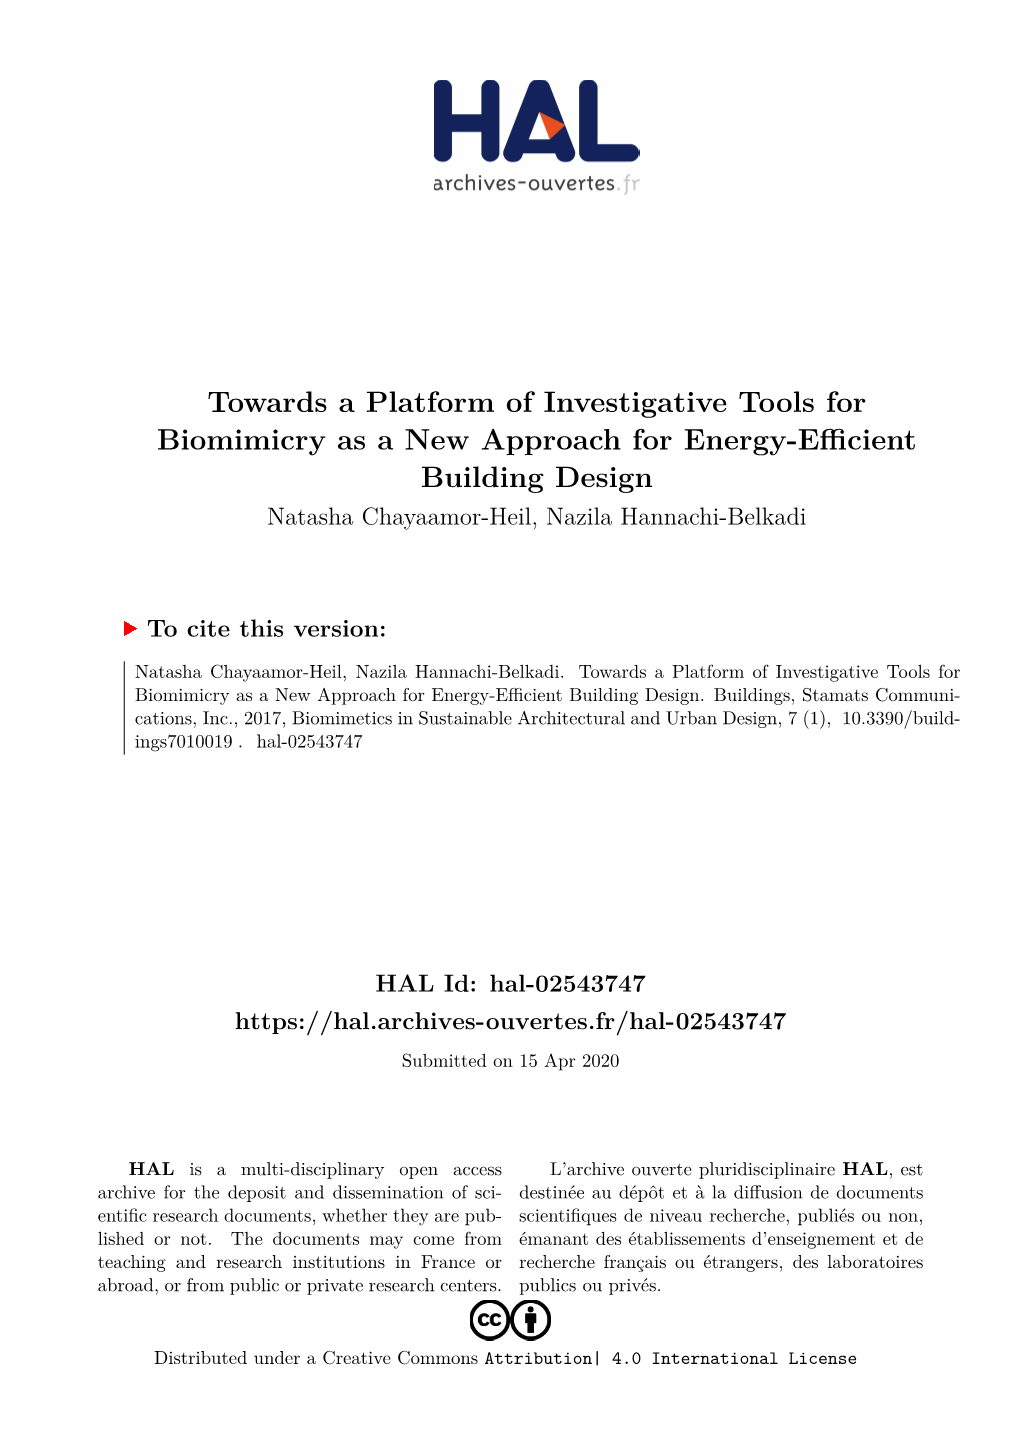 Towards a Platform of Investigative Tools for Biomimicry As a New Approach for Energy-Eﬀicient Building Design Natasha Chayaamor-Heil, Nazila Hannachi-Belkadi